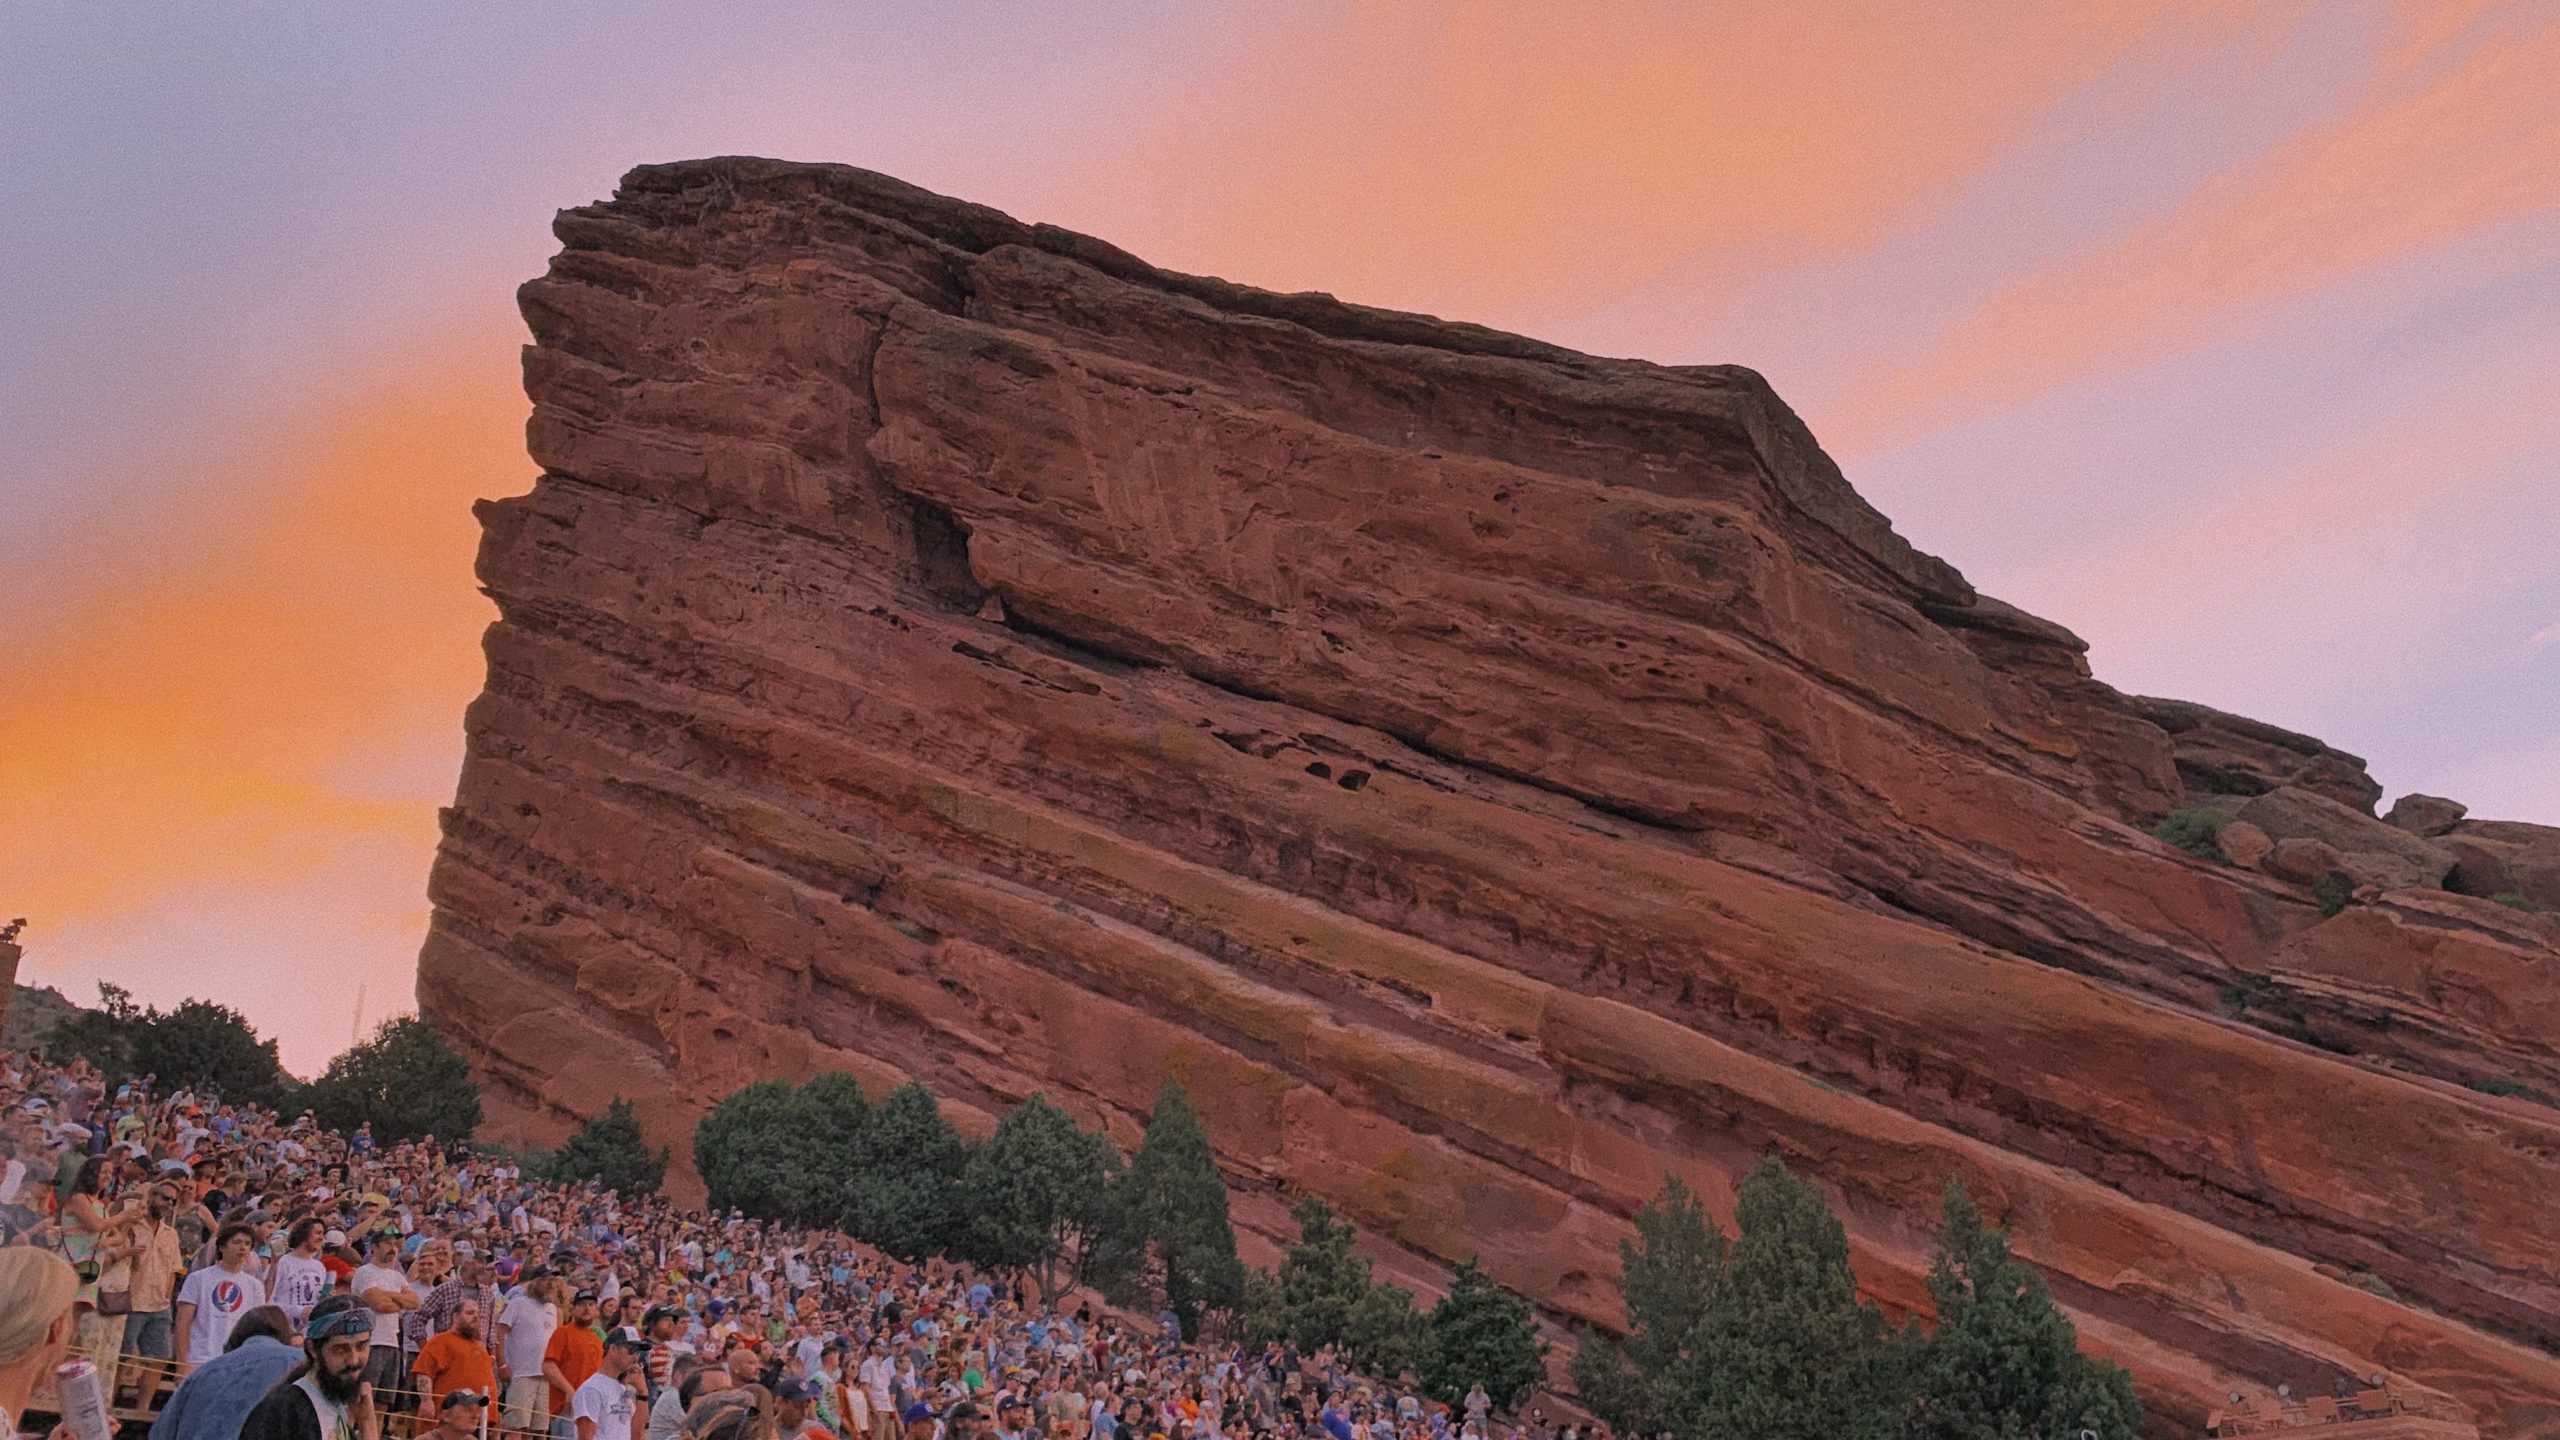 The sun sets over Red Rocks Amphitheatre